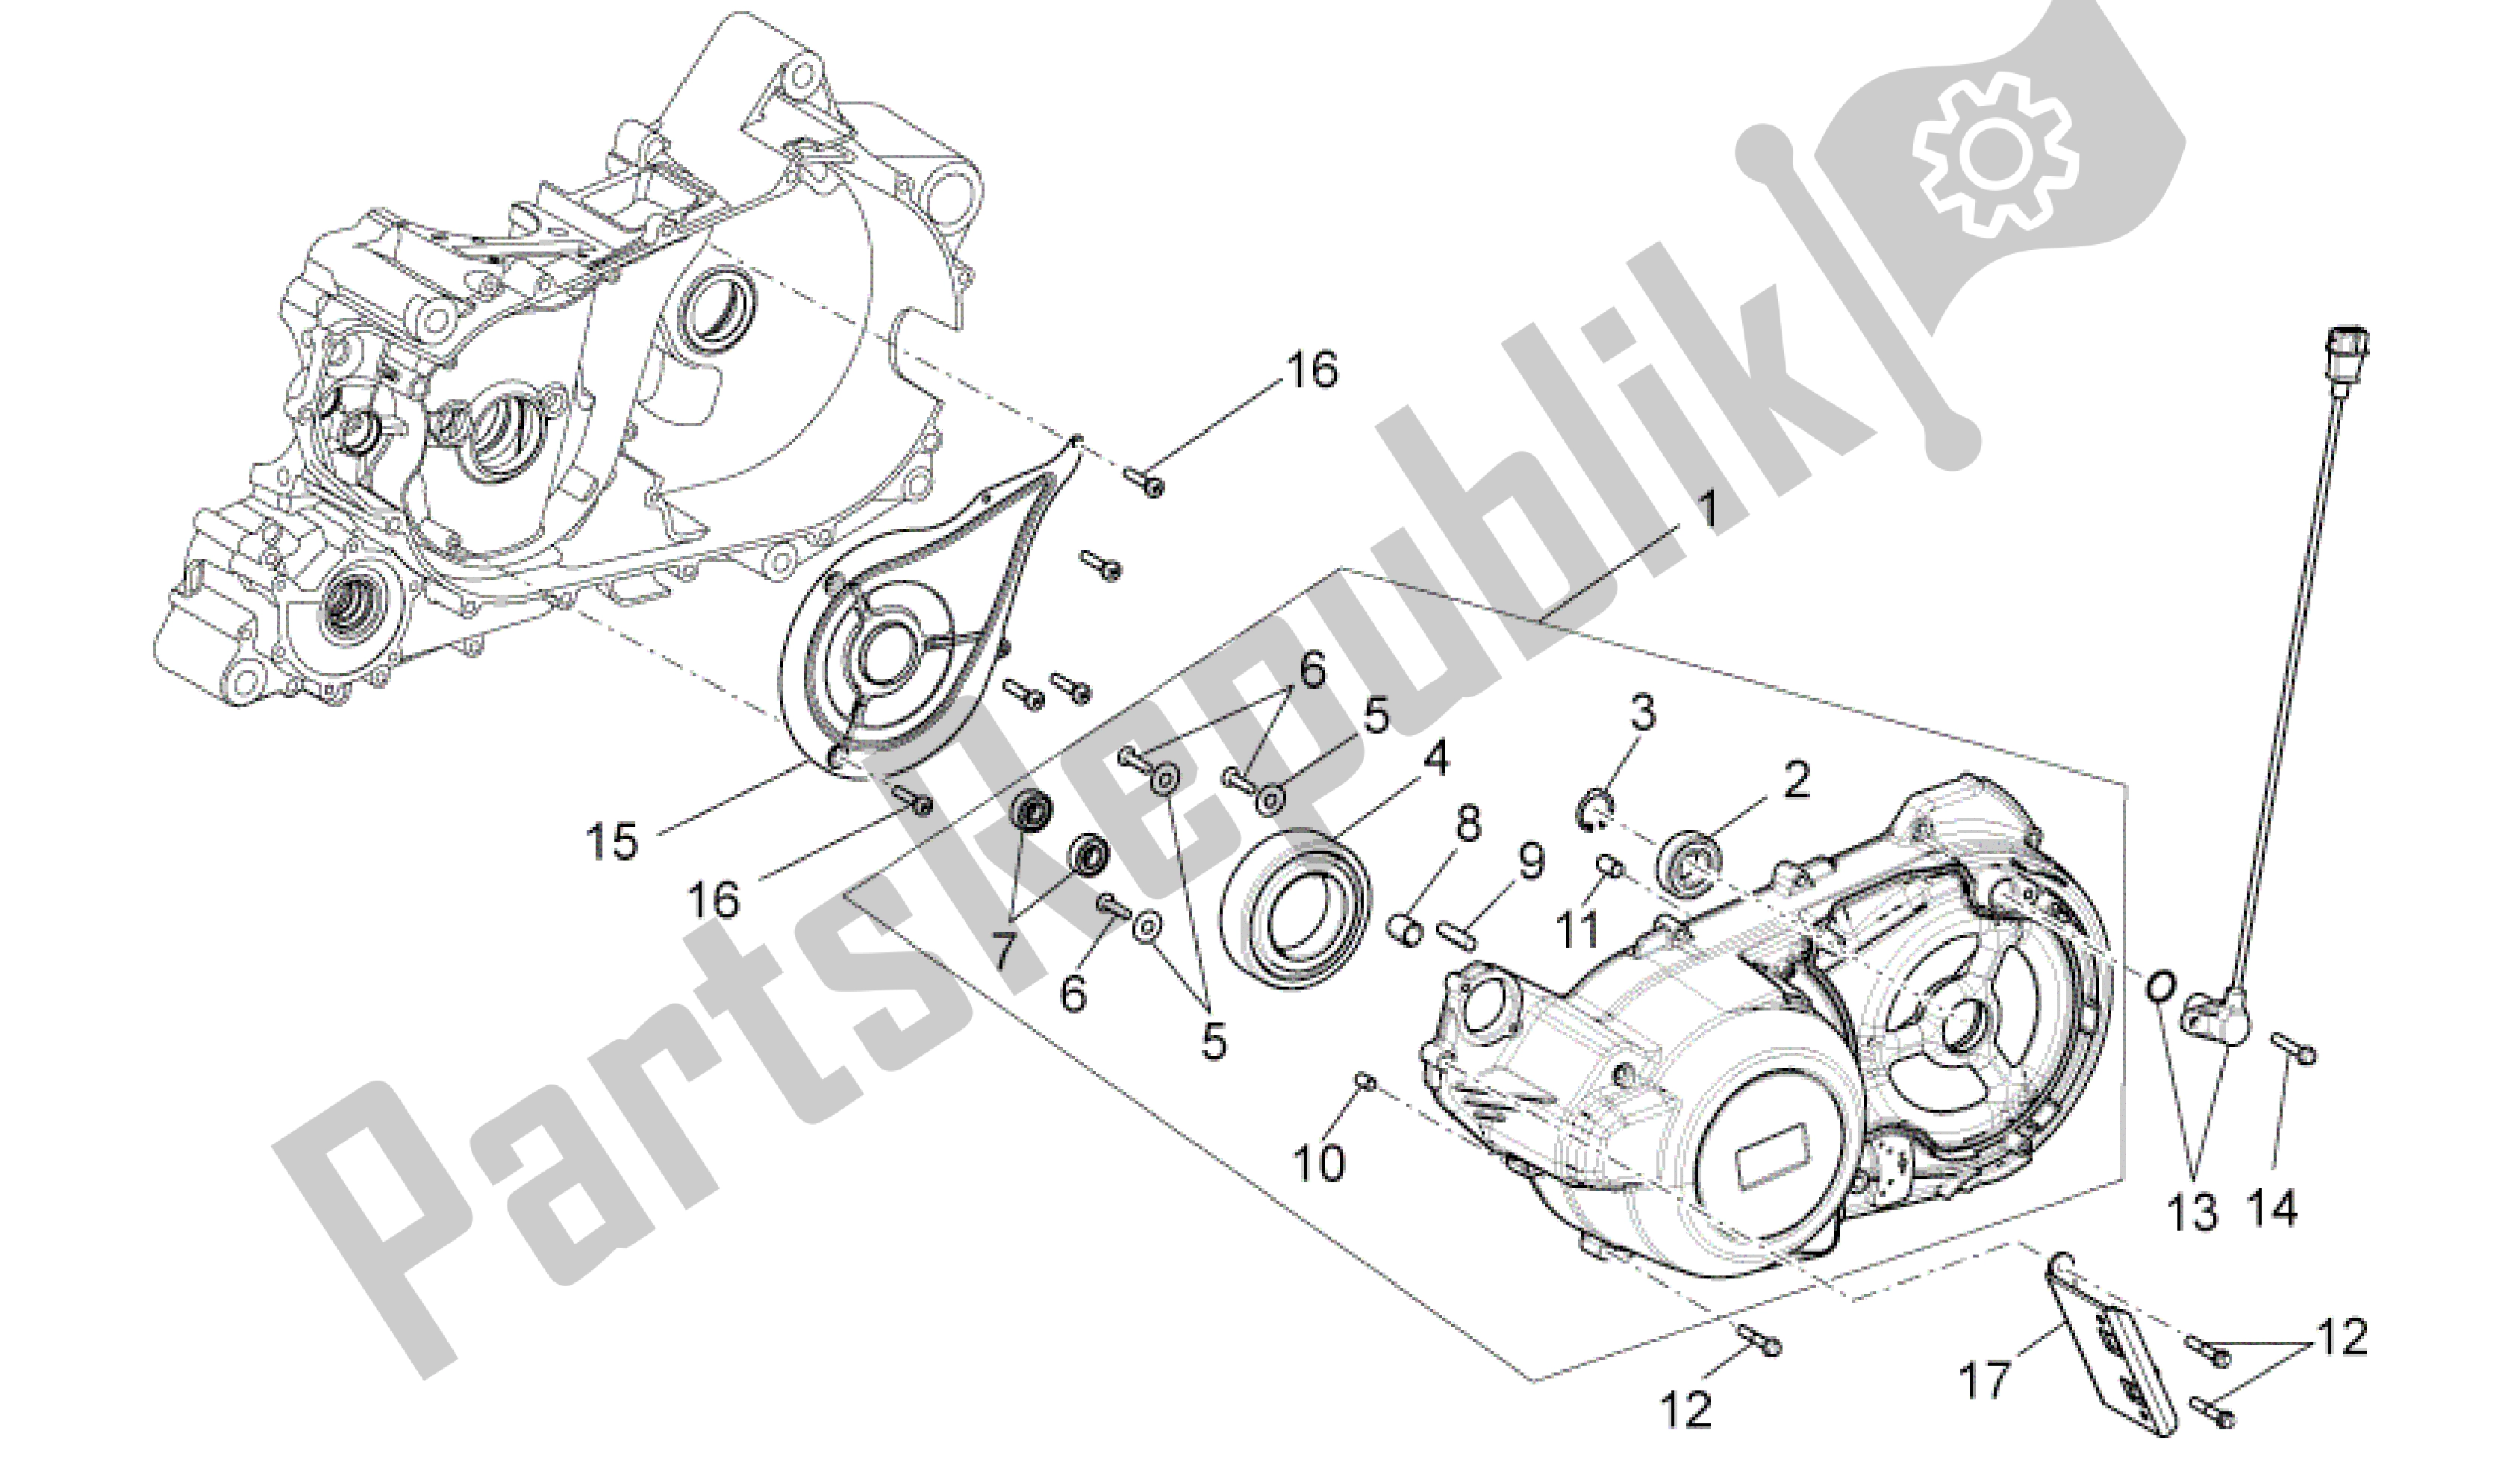 All parts for the Transmission Cover of the Aprilia Mana 850 2009 - 2011